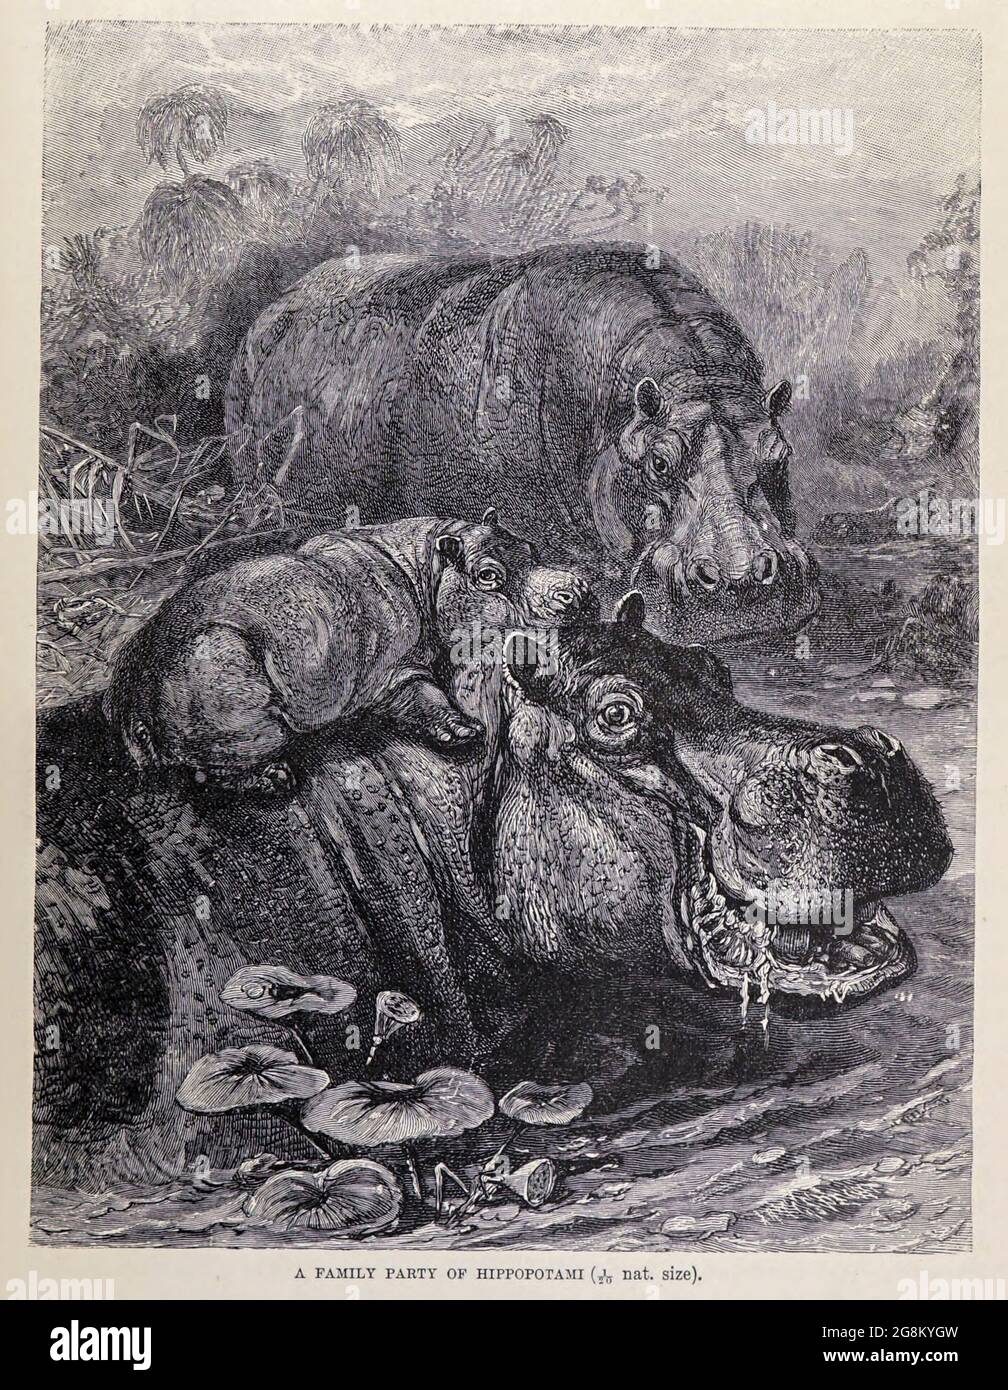 A Family Party of Hippopotami. The hippopotamus (Hippopotamus amphibius), also called the hippo, common hippopotamus or river hippopotamus, is a large, mostly herbivorous, semiaquatic mammal and ungulate native to sub-Saharan Africa. From the book ' Royal Natural History ' Volume 2 Edited by Richard Lydekker, Published in London by Frederick Warne & Co in 1893-1894 Stock Photo